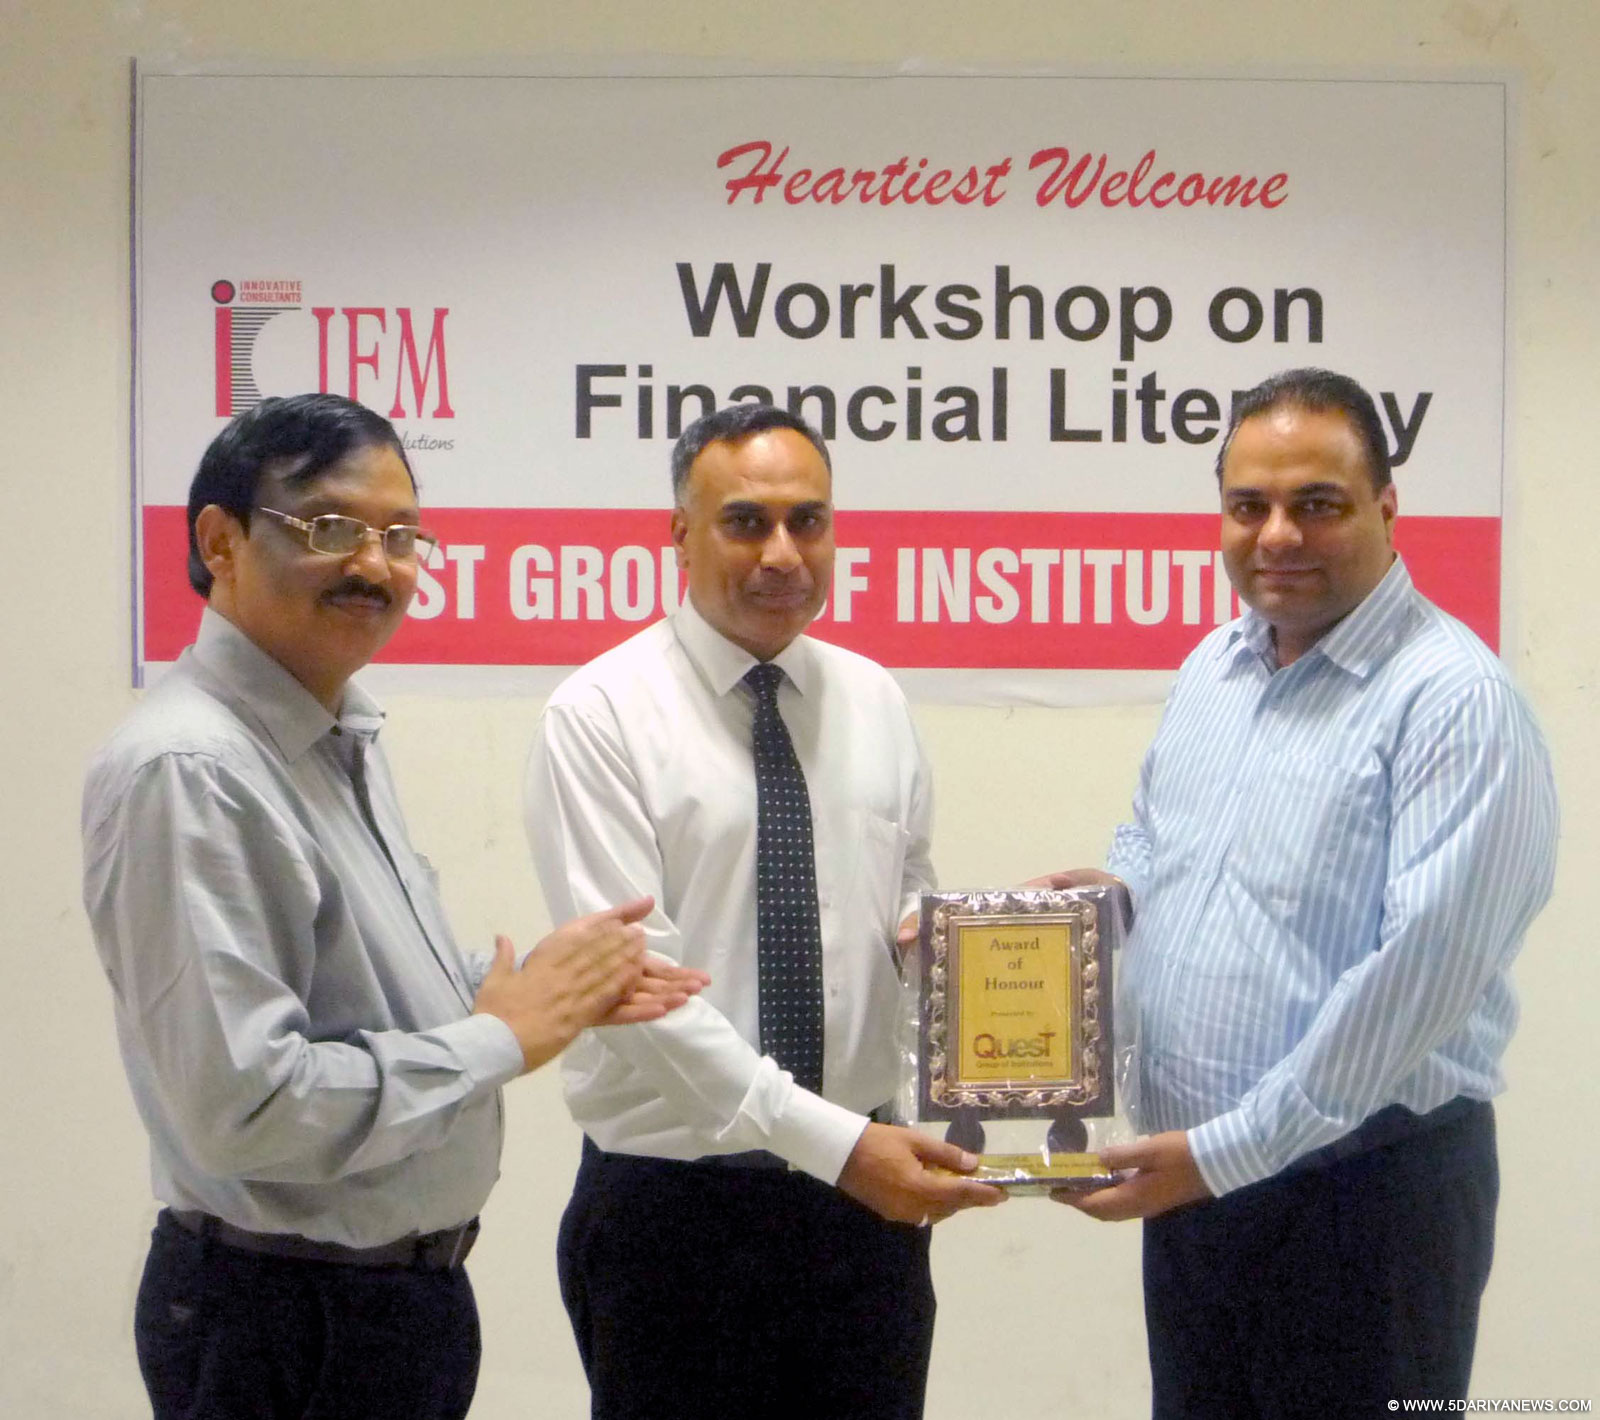 Quest Group of Institutes organized a workshop on Financial Literacy